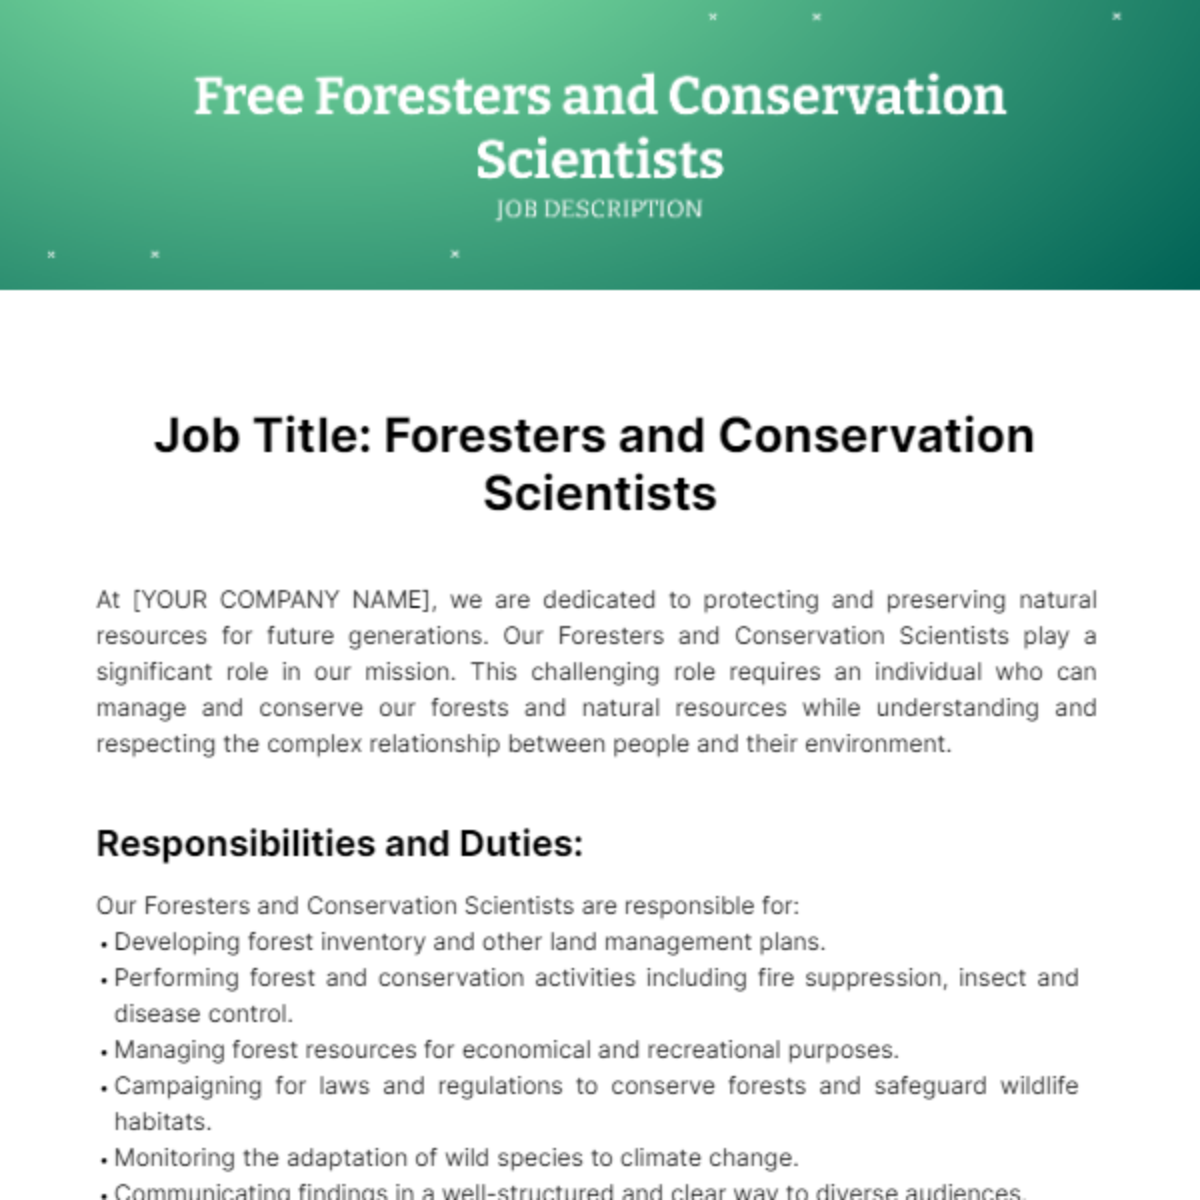 Free Foresters and Conservation Scientists Job Description Template